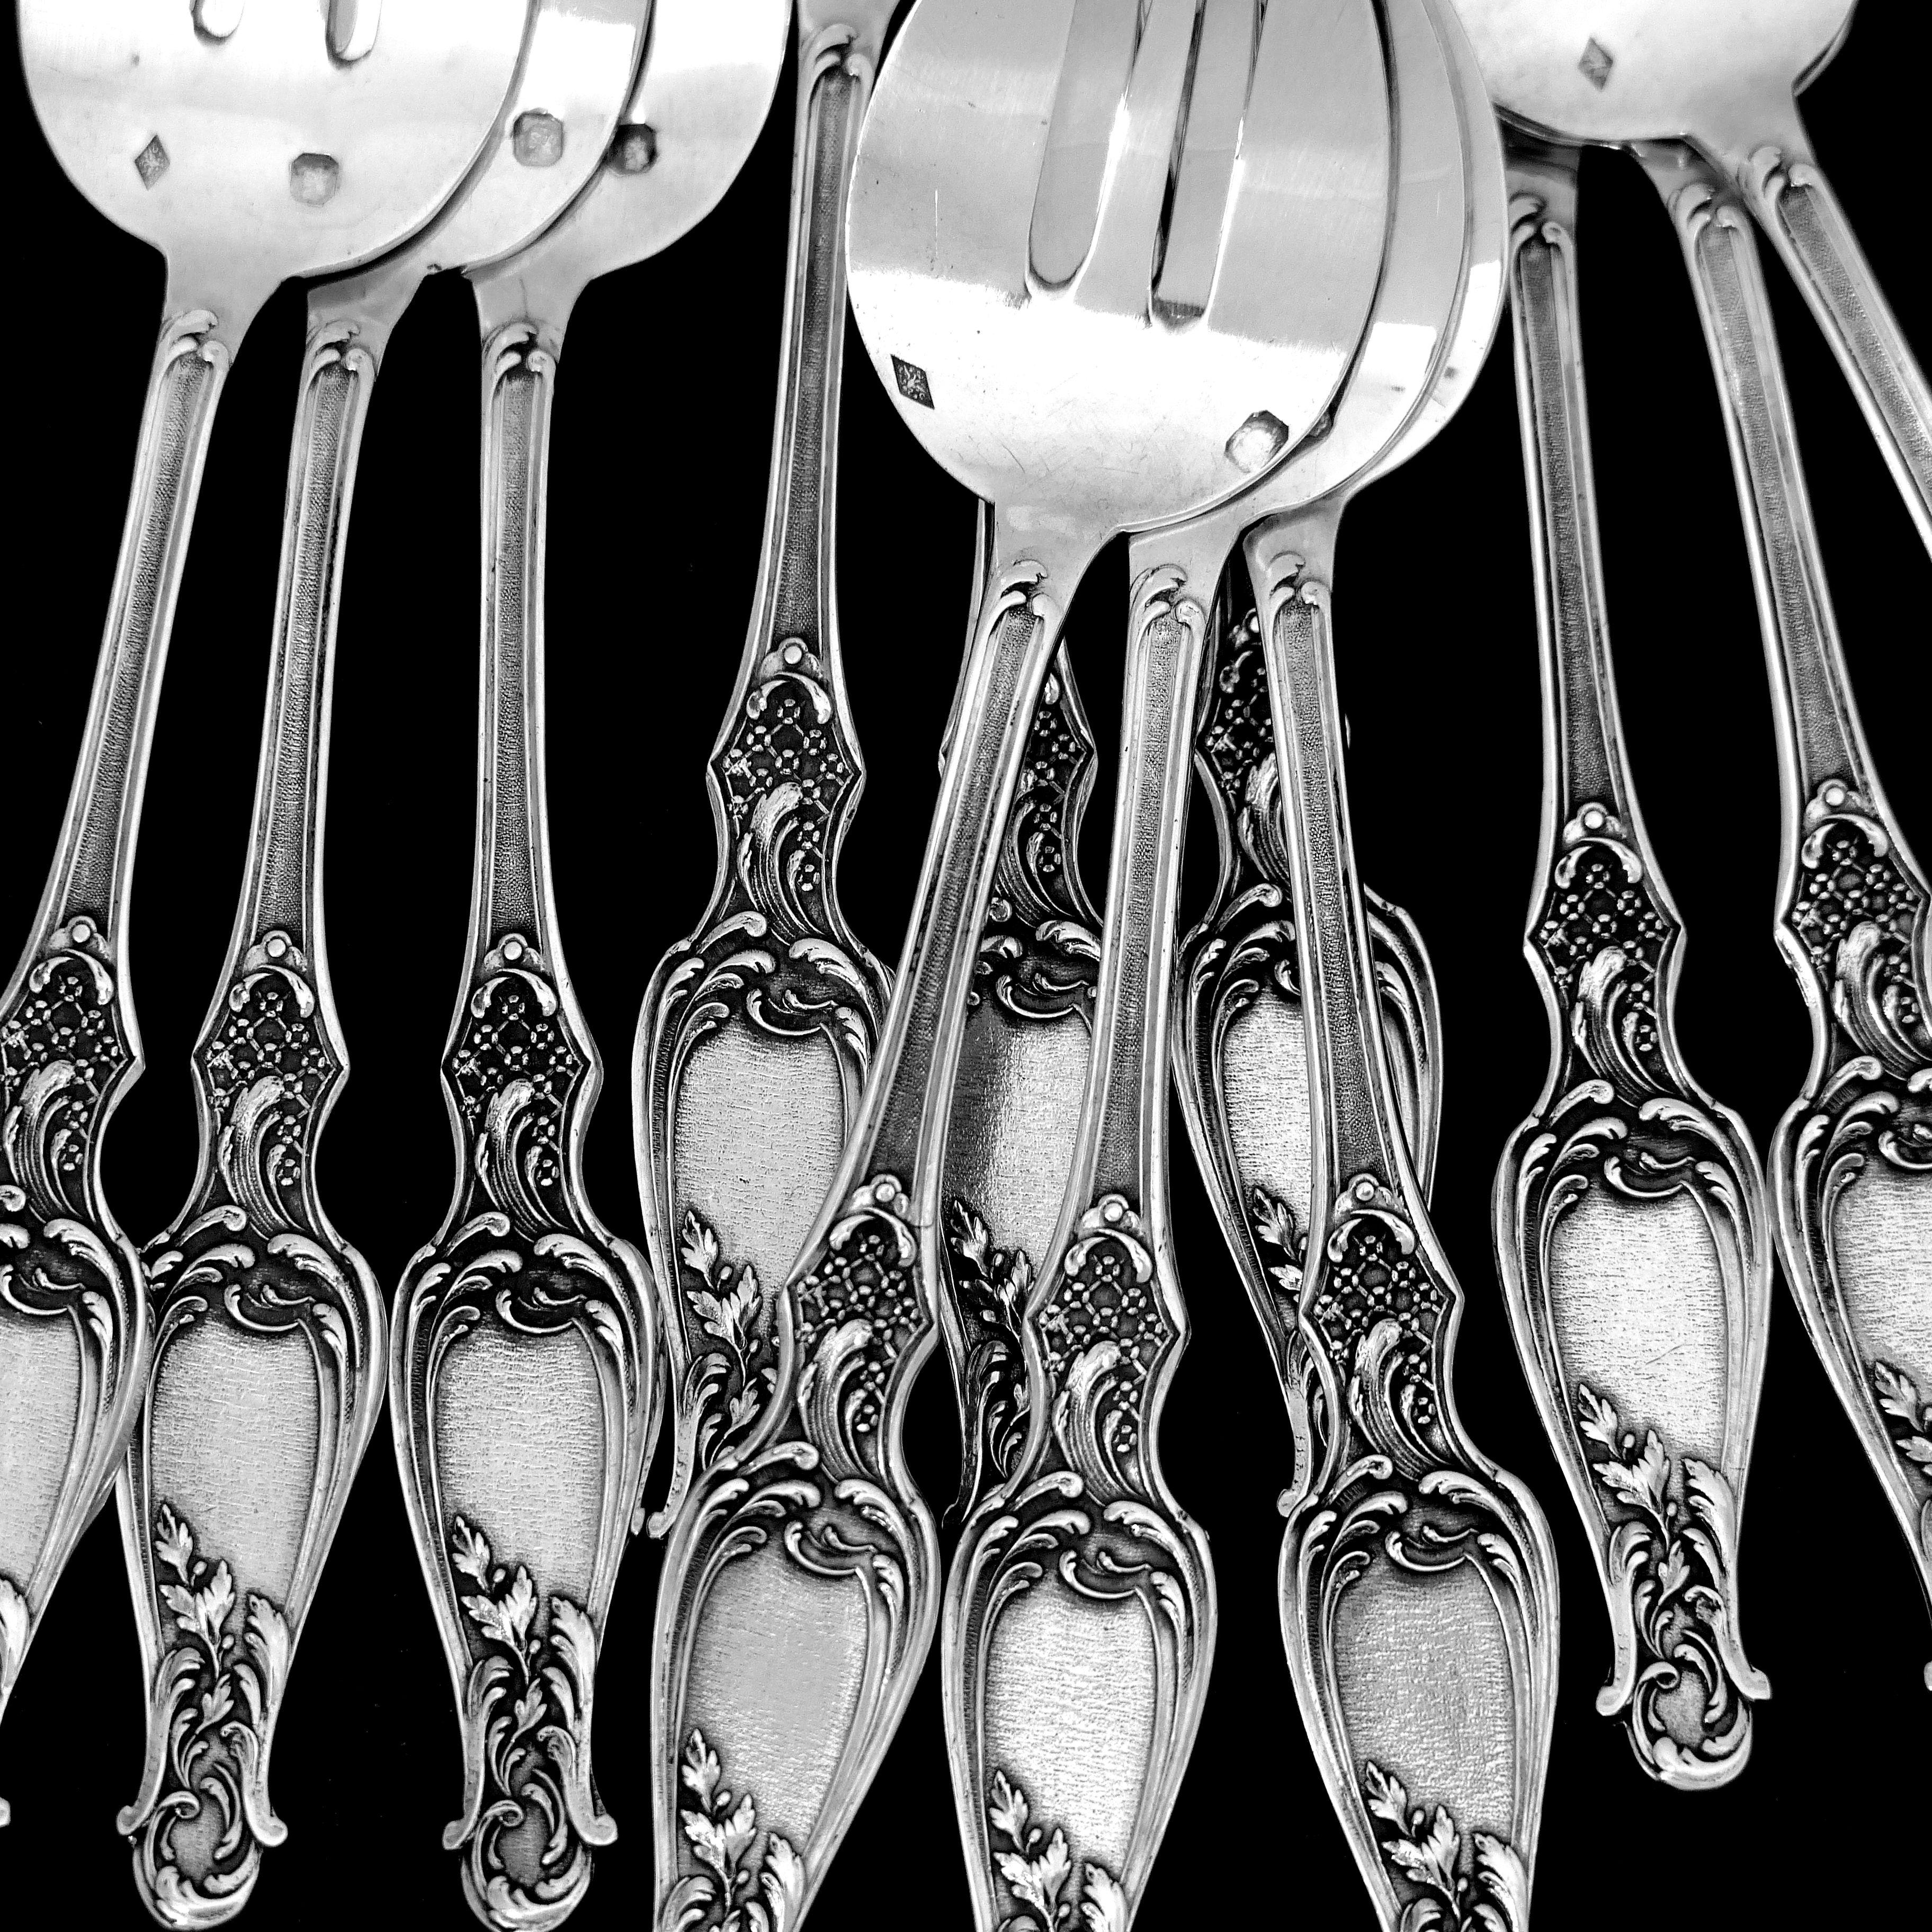 Early 20th Century Antique French All Sterling Silver Oyster Forks Set 12 Pc, Art Nouveau